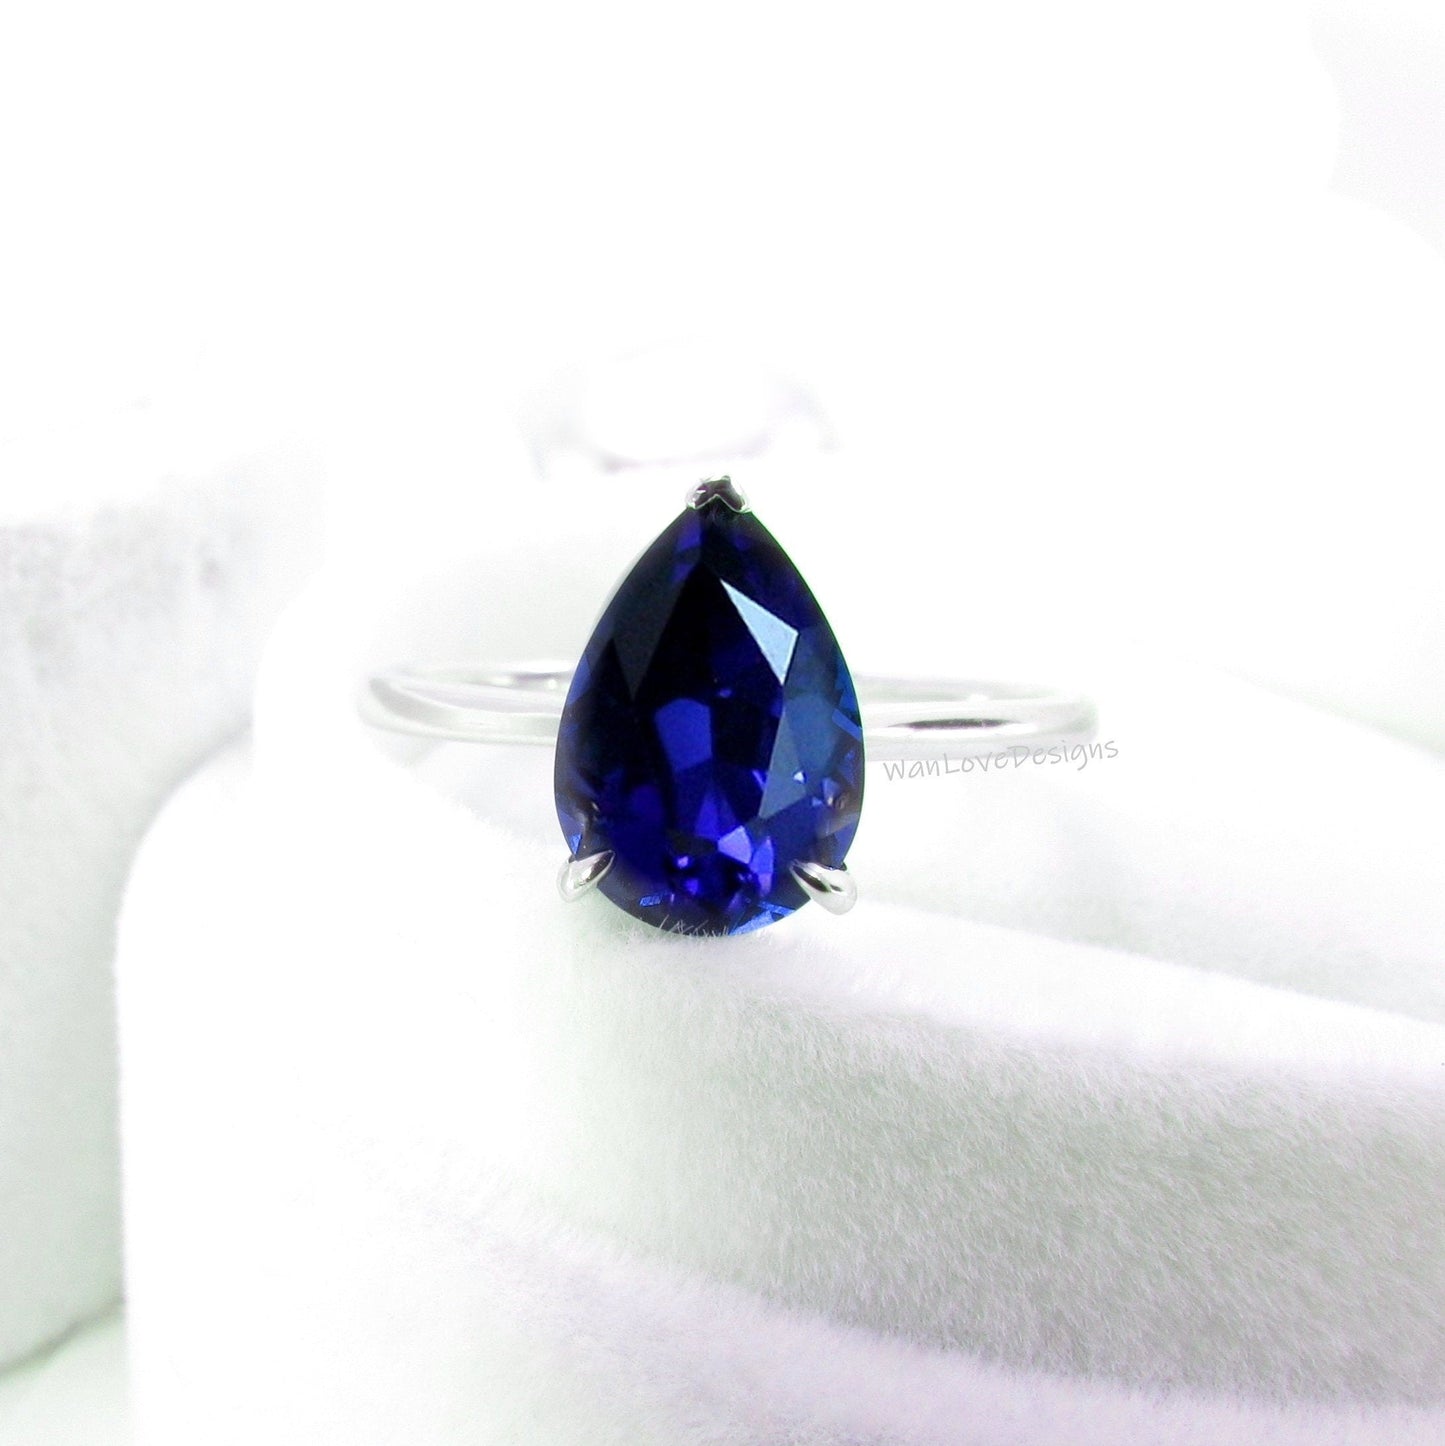 Pear Blue Sapphire Engagement Ring Antique White Gold Side Halo Diamond dainty Ring Art Deco Wedding Bridal Ring Anniversary Promise Ring Wan Love Designs